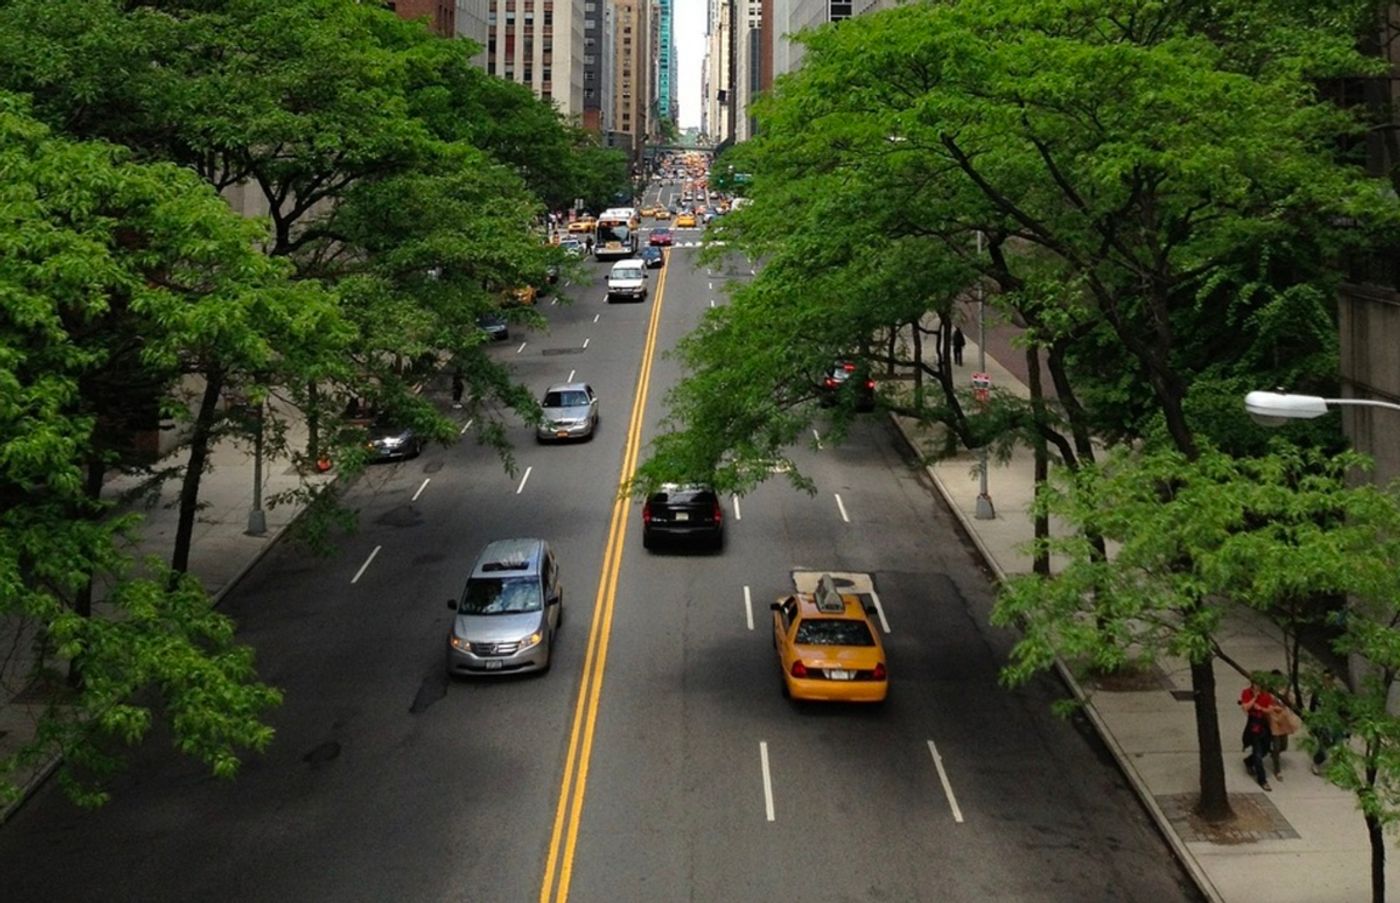 Do trees in an urban setting grow faster than those in a rural setting? A new study says yes.